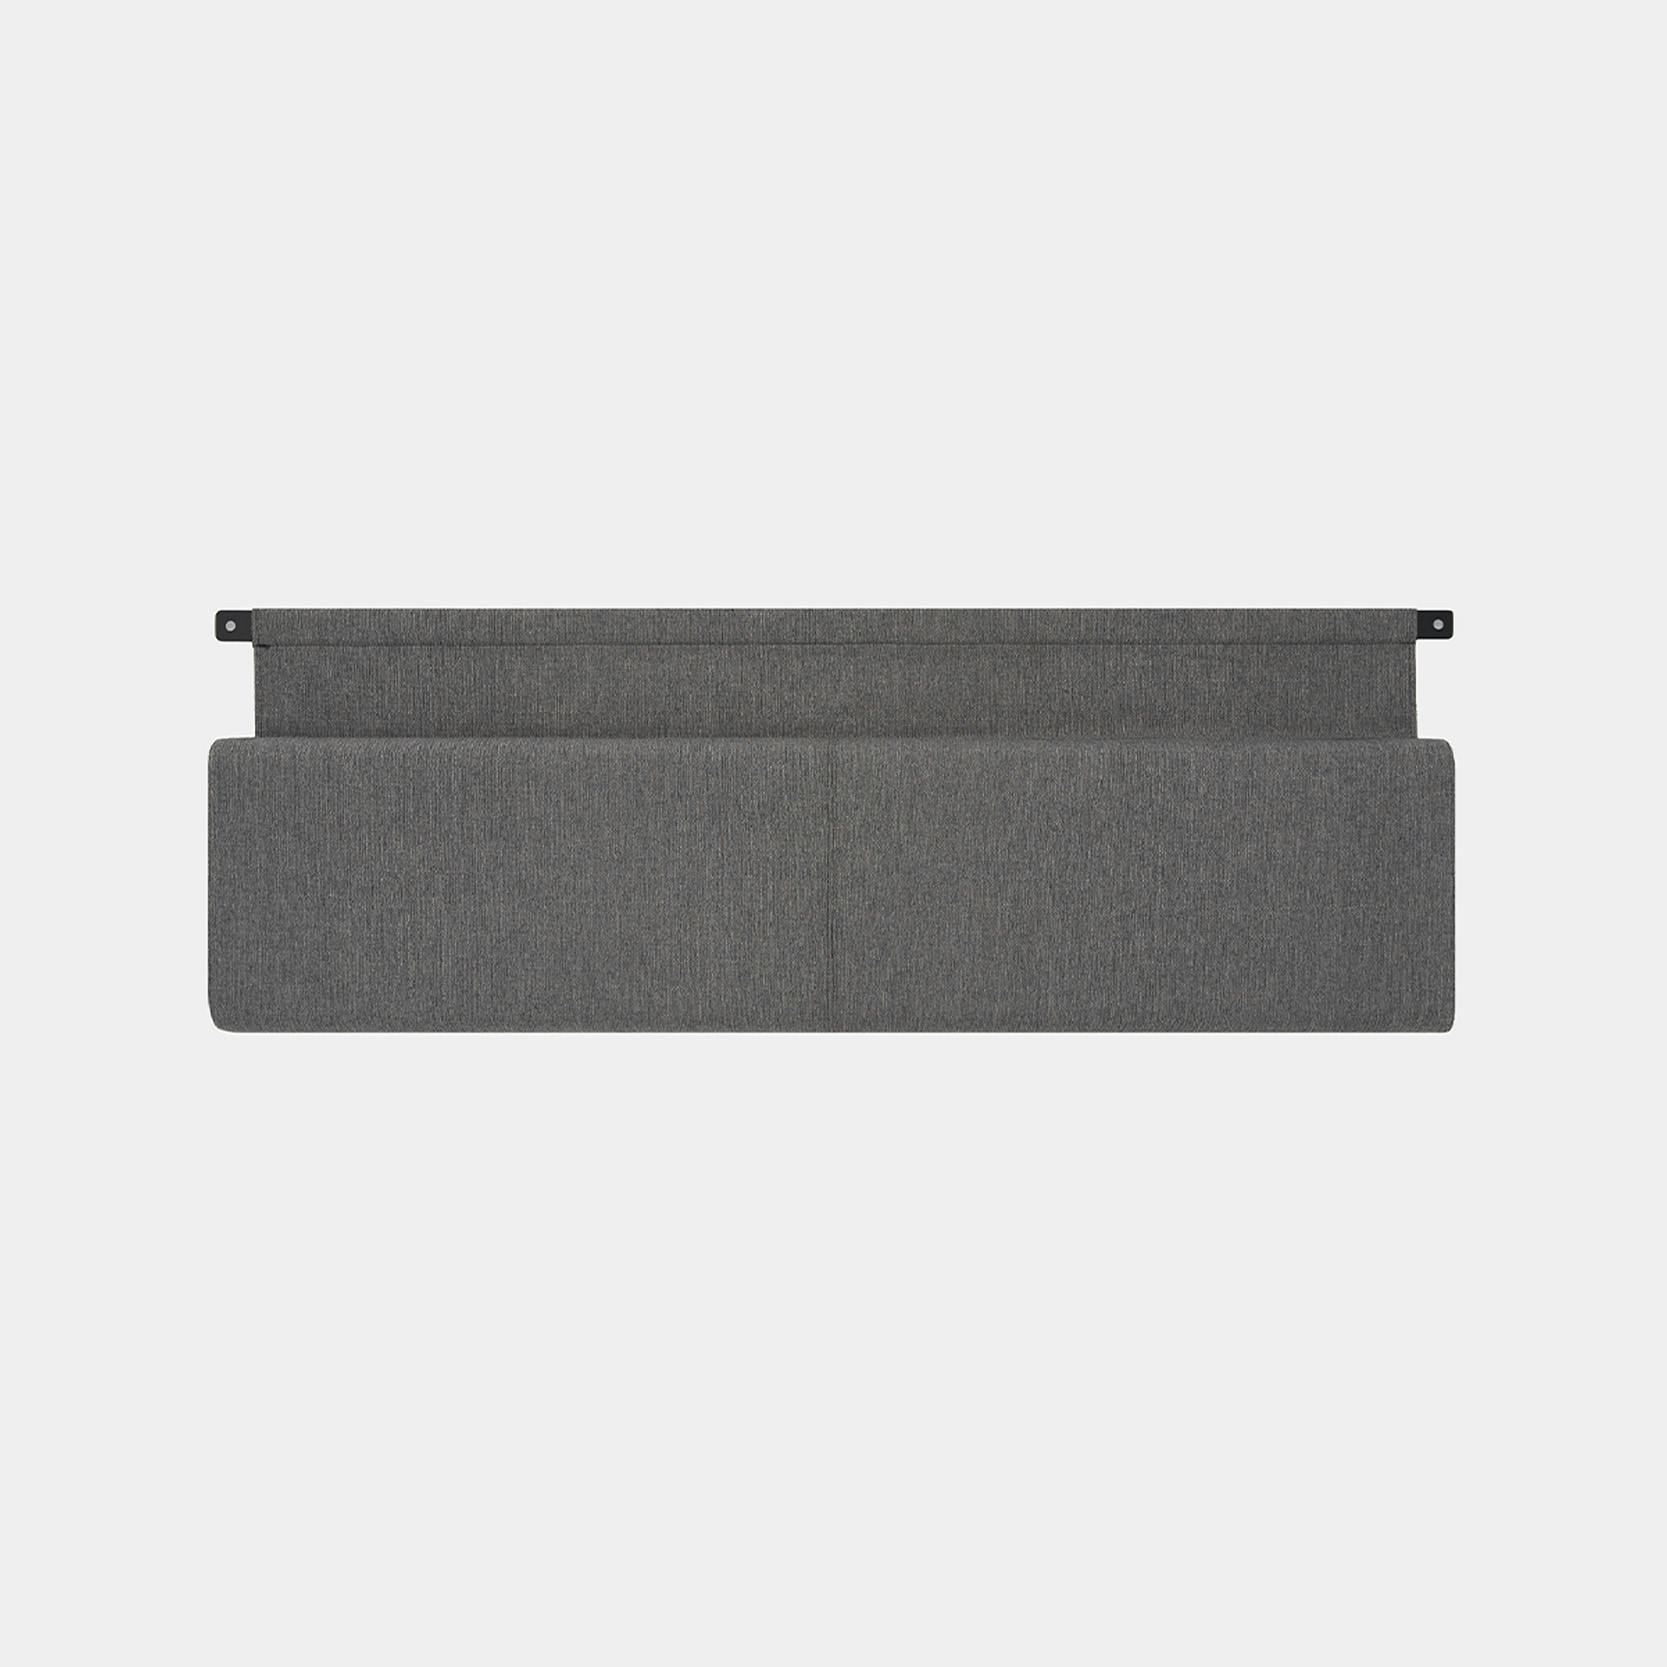 Headboard Cushion Cover (Dark Charcoal) - Render - Front